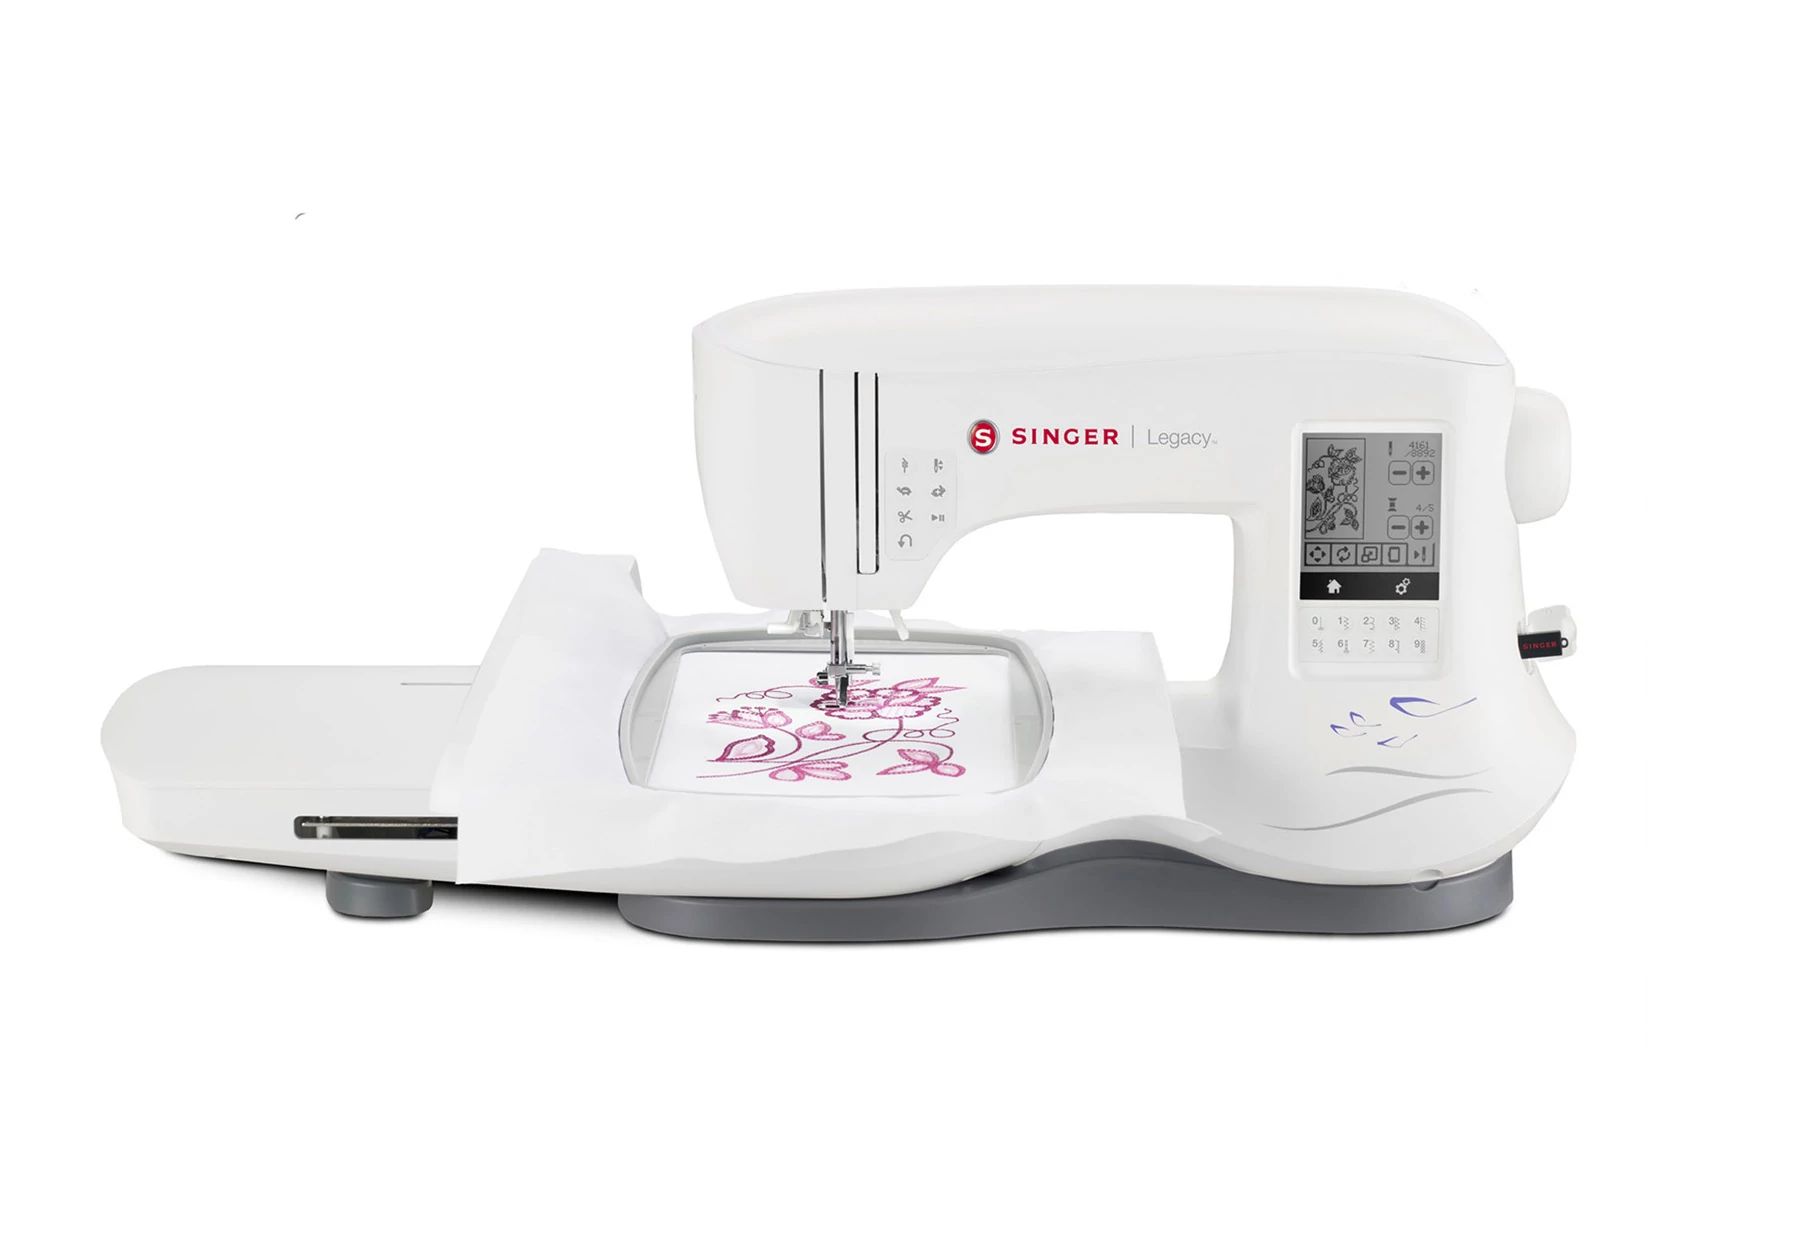 SE300 singer legacy™ SE300 sewing and embroidery machine